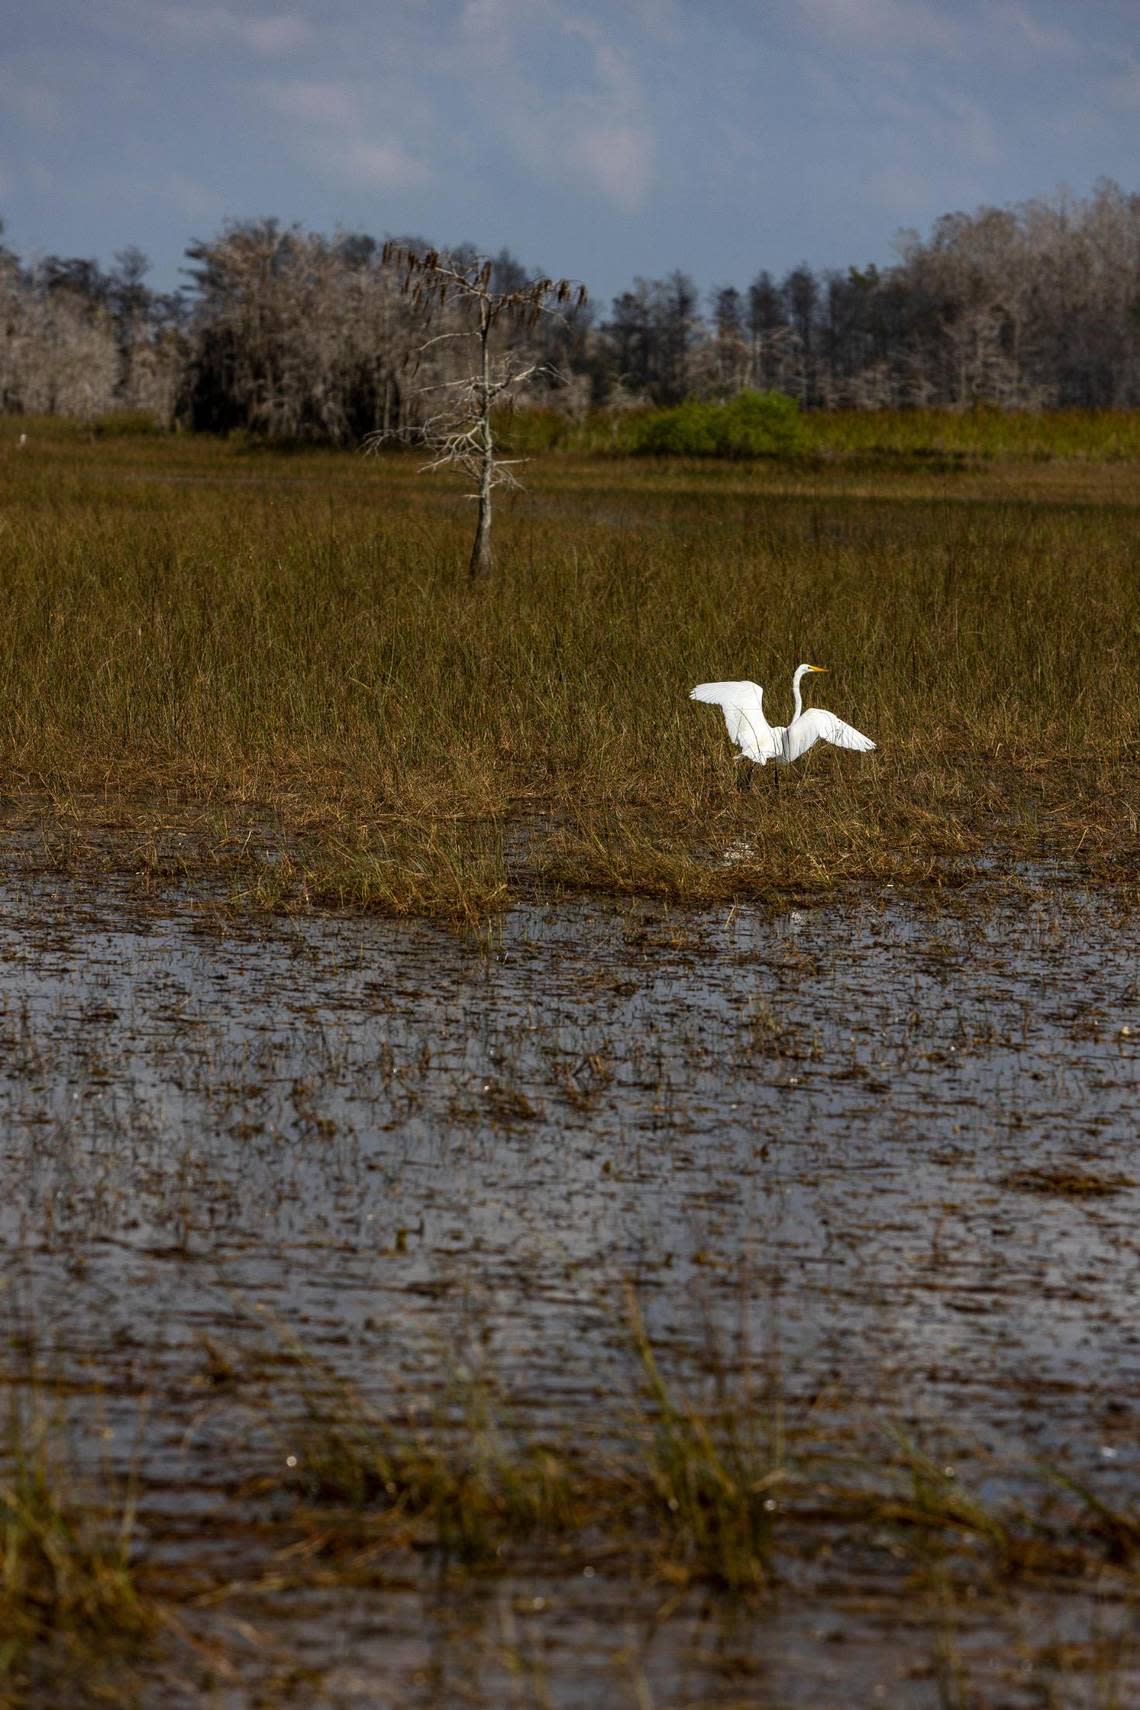 An egret prepares to take flight in the Florida Everglades on Feb. 24, 2023.